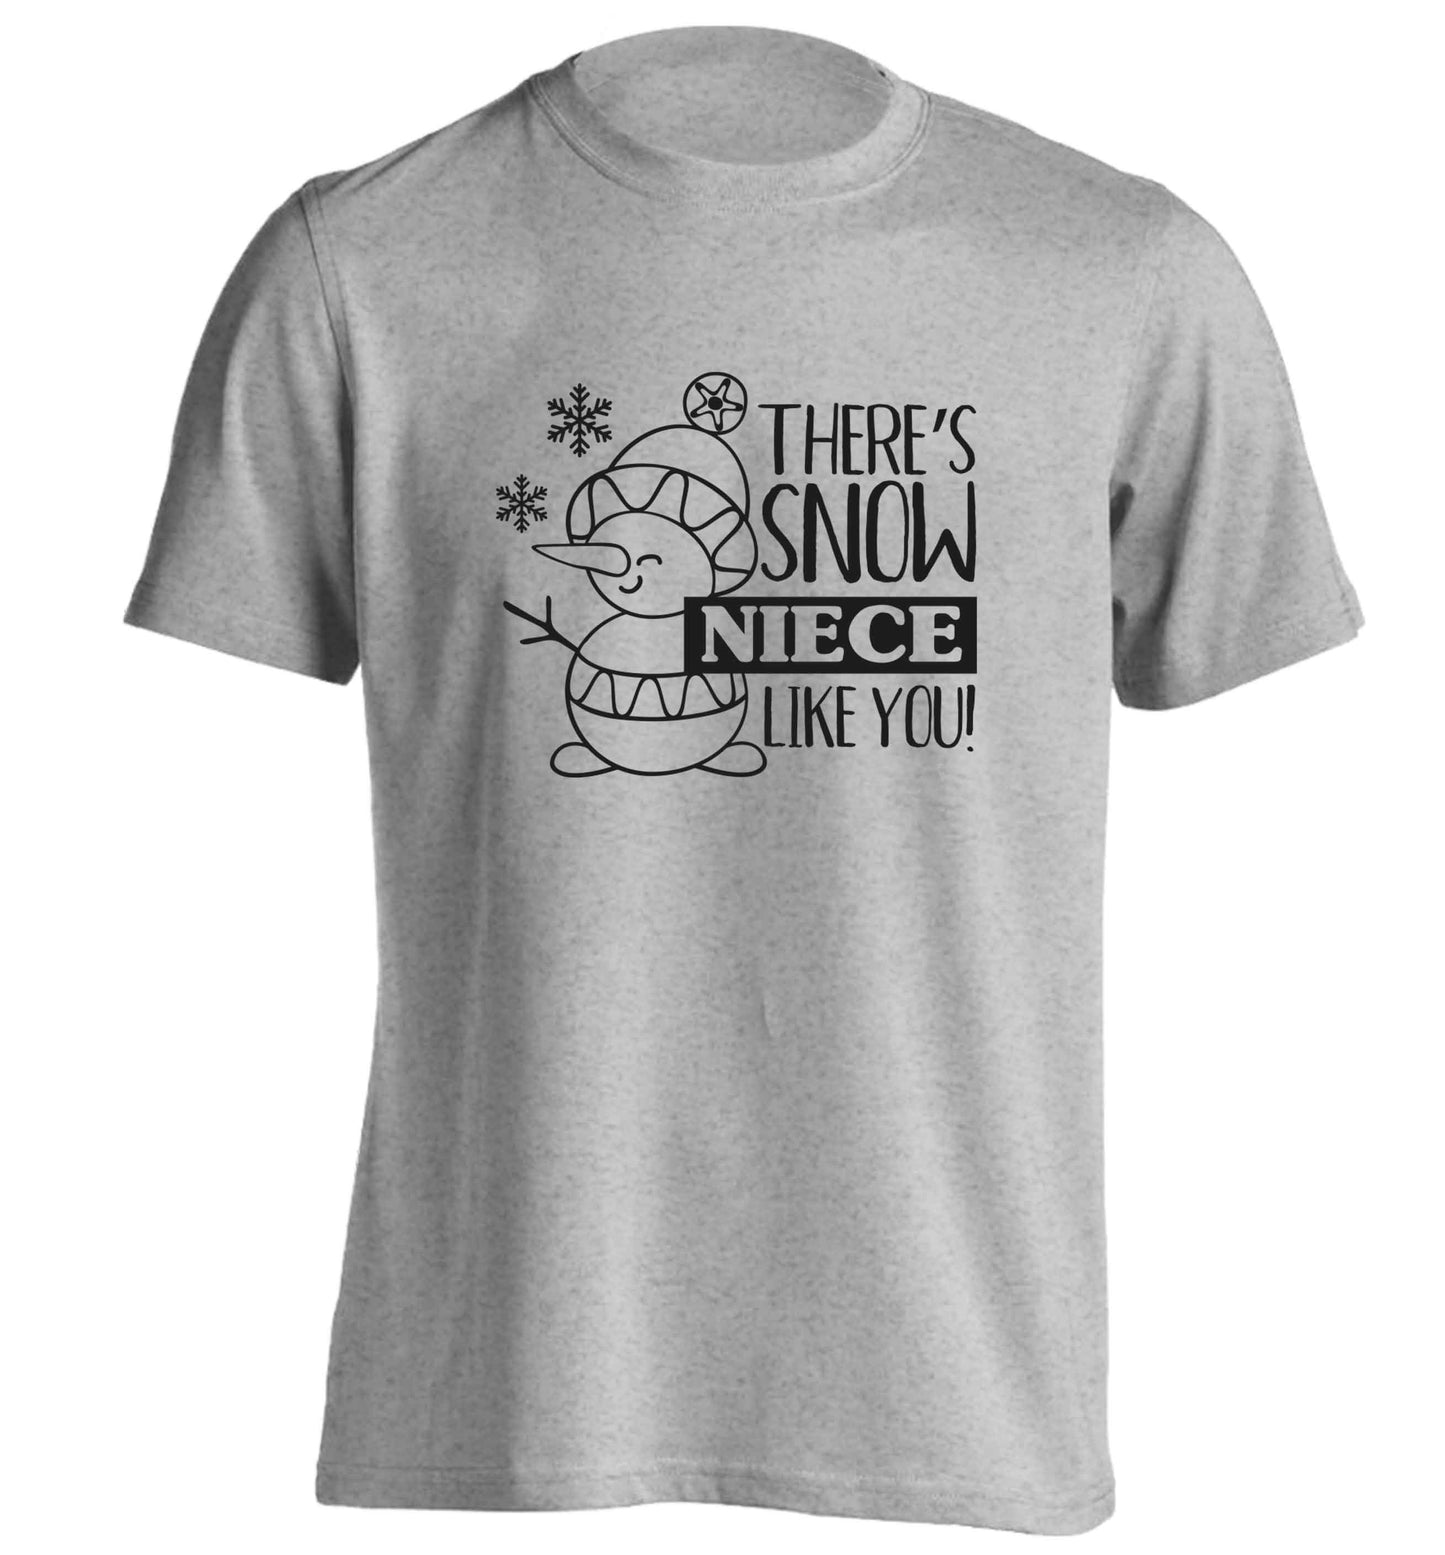 There's snow niece like you adults unisex grey Tshirt 2XL